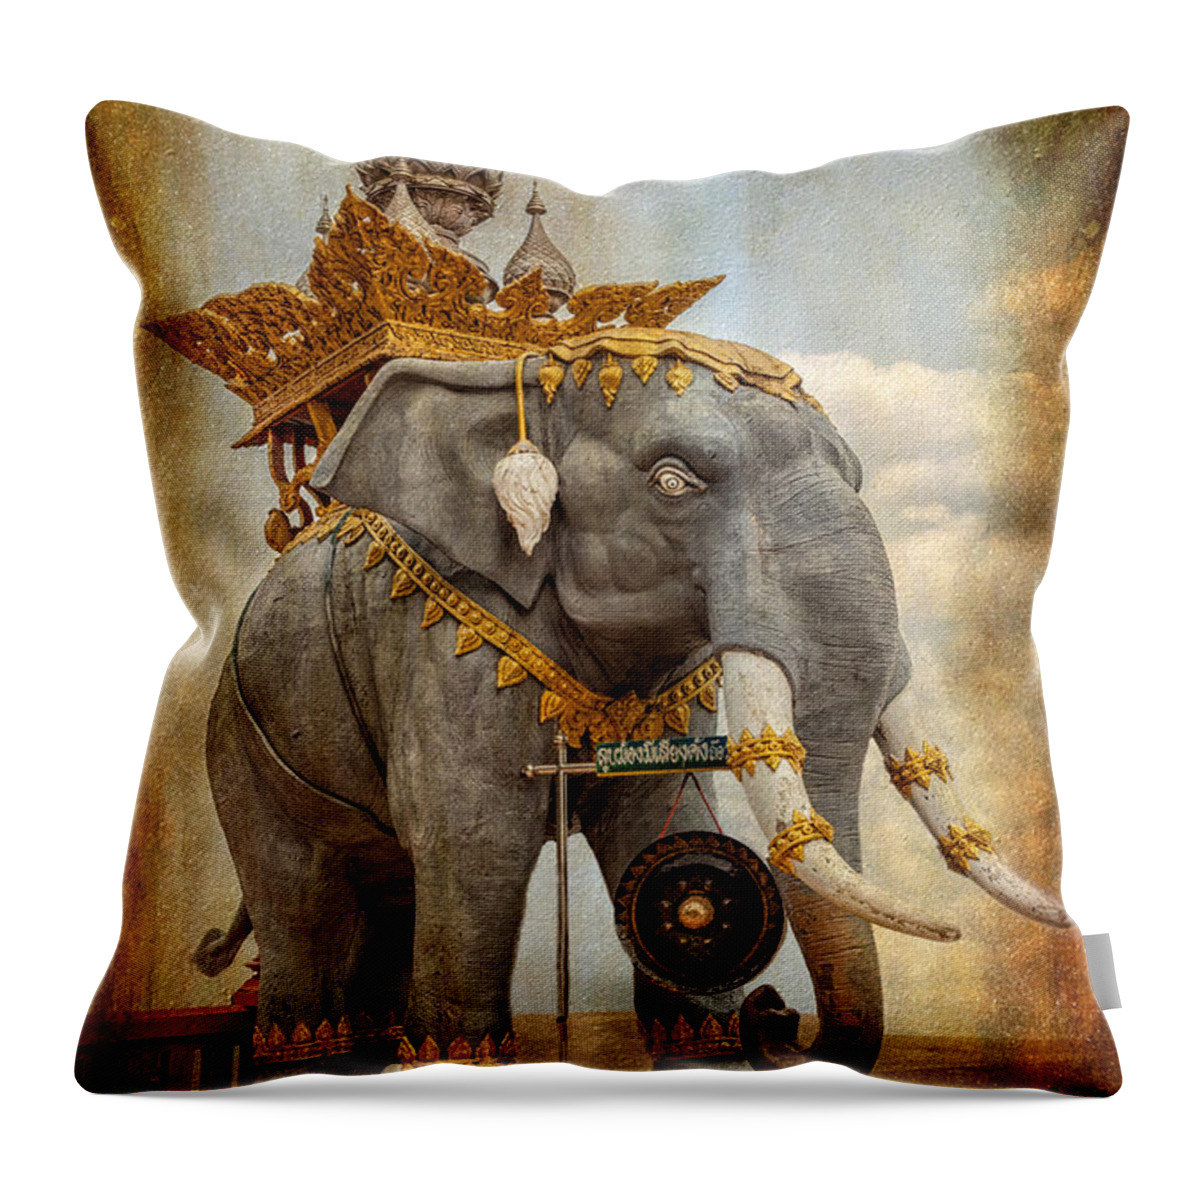 Architecture Throw Pillow featuring the photograph Decorative Elephant by Adrian Evans